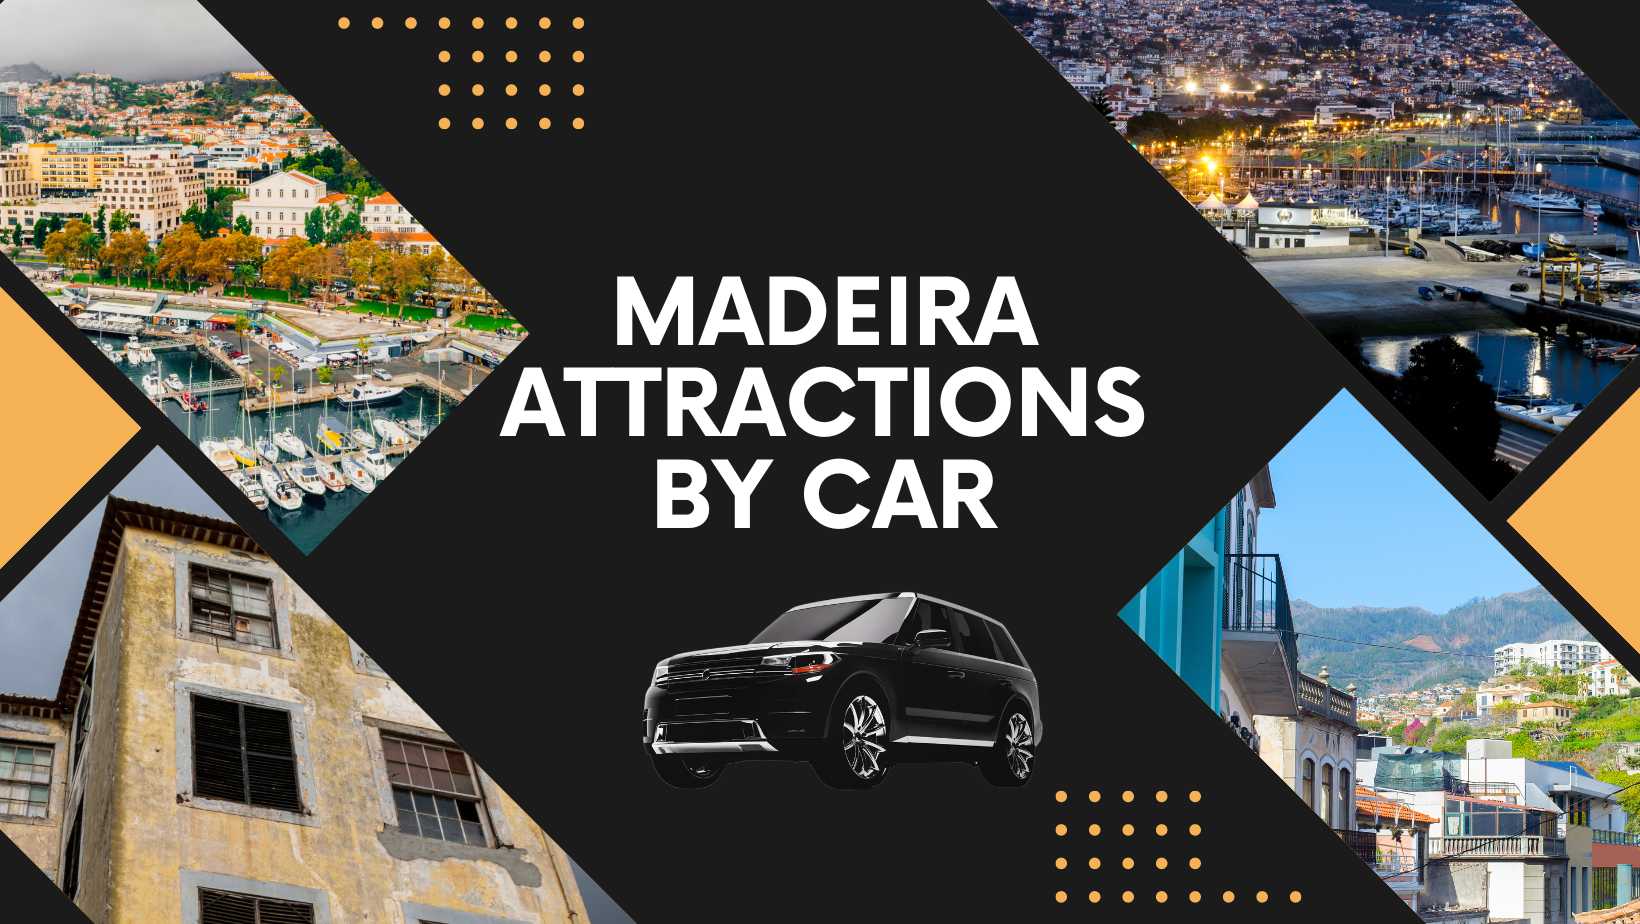 Madeira attractions by car